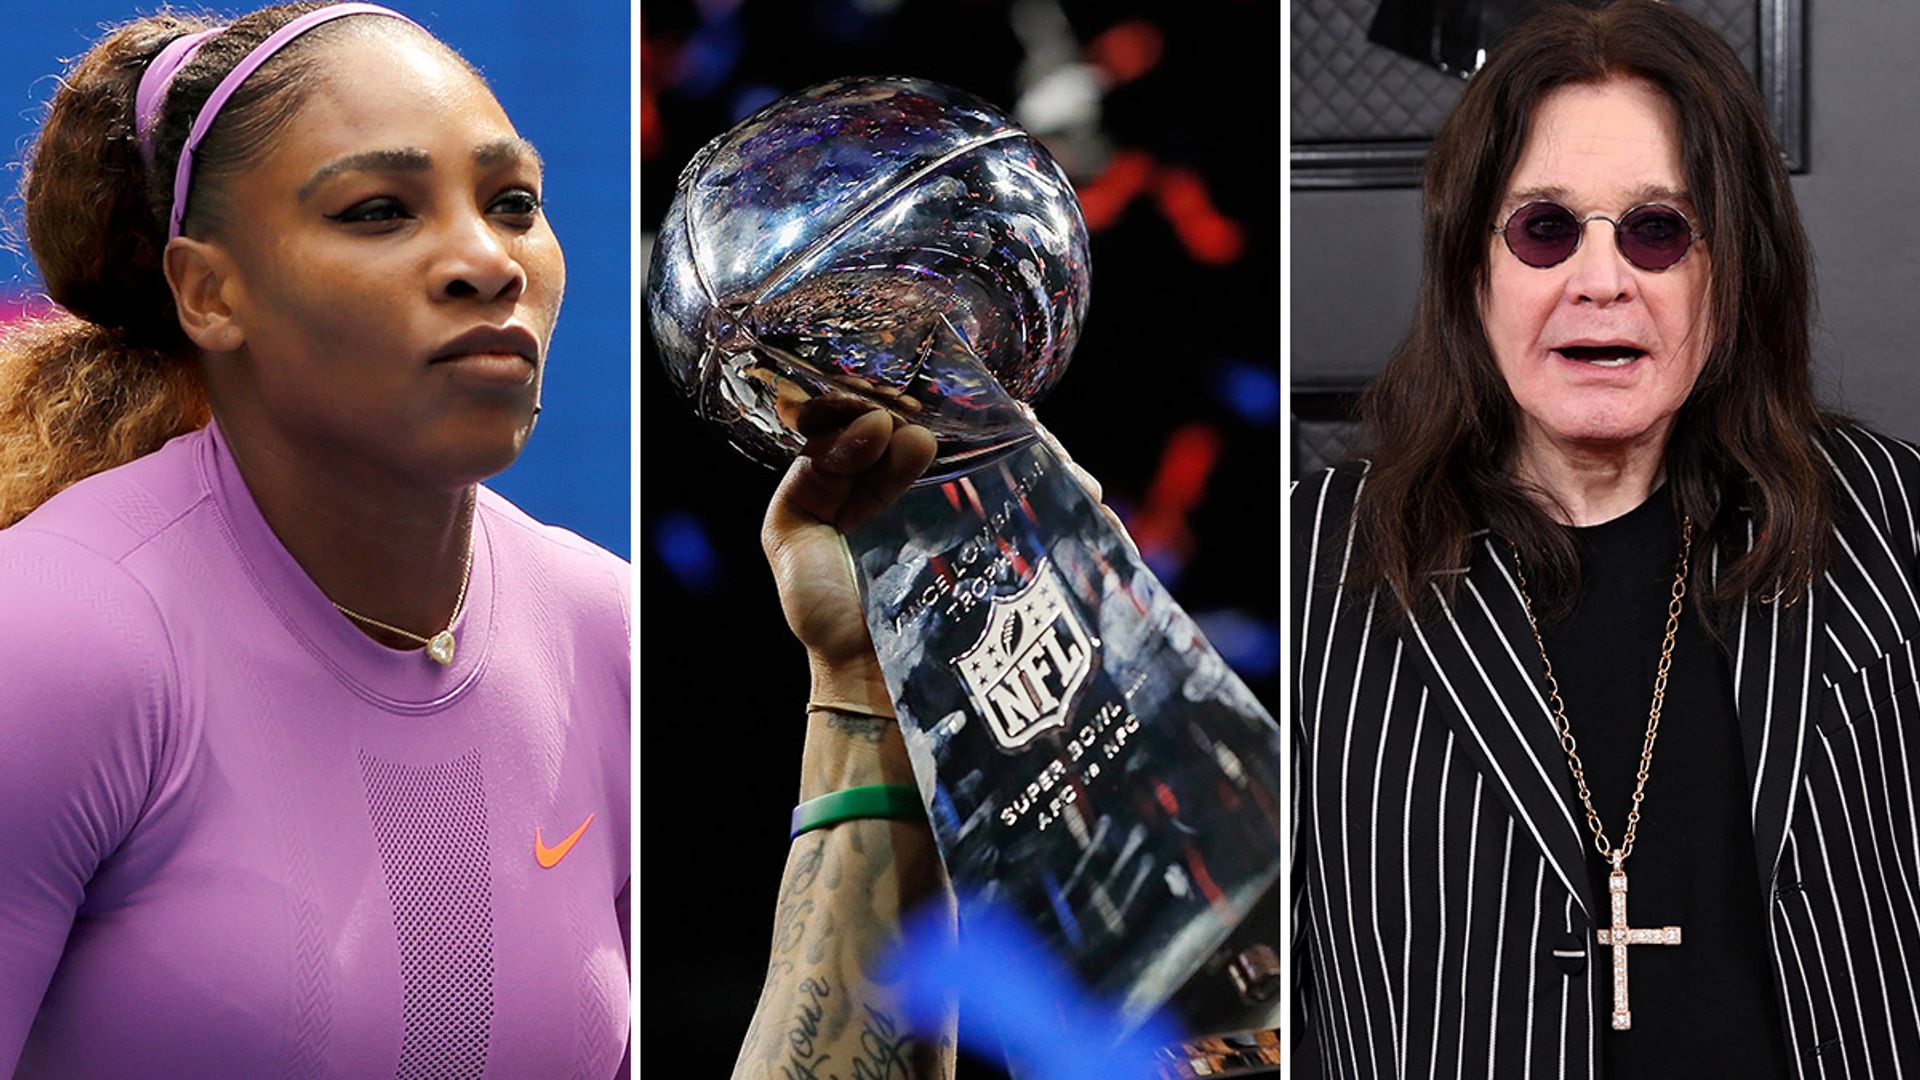 Super Bowl 2023 5 commercials you need to see starring Serena Williams